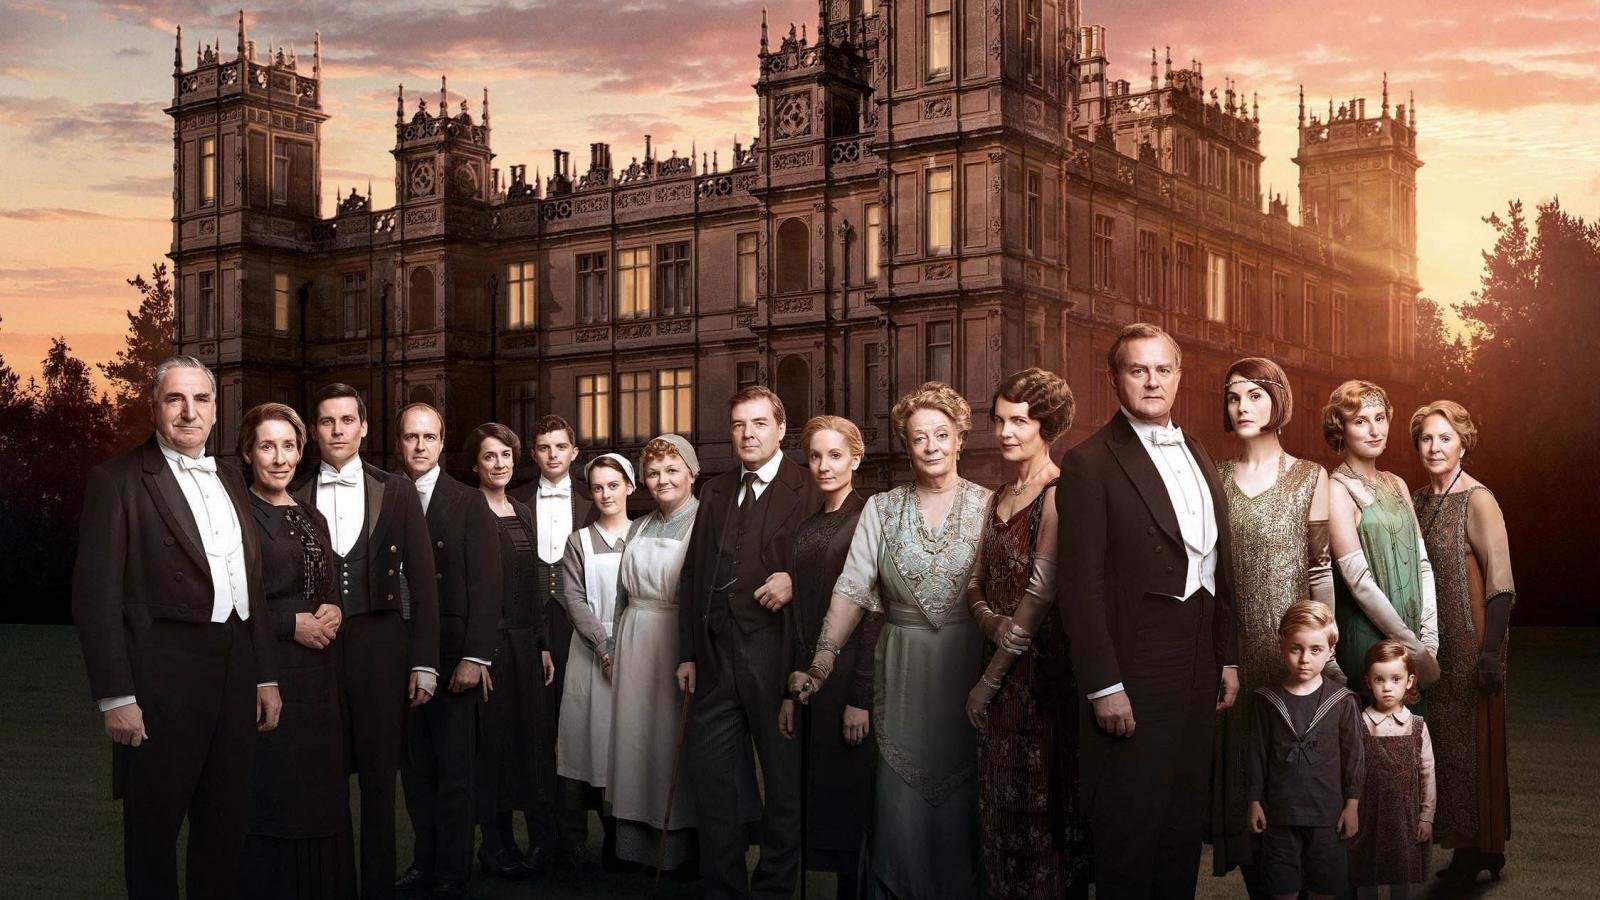 Downton Abbey wallpapers HD for desktop backgrounds